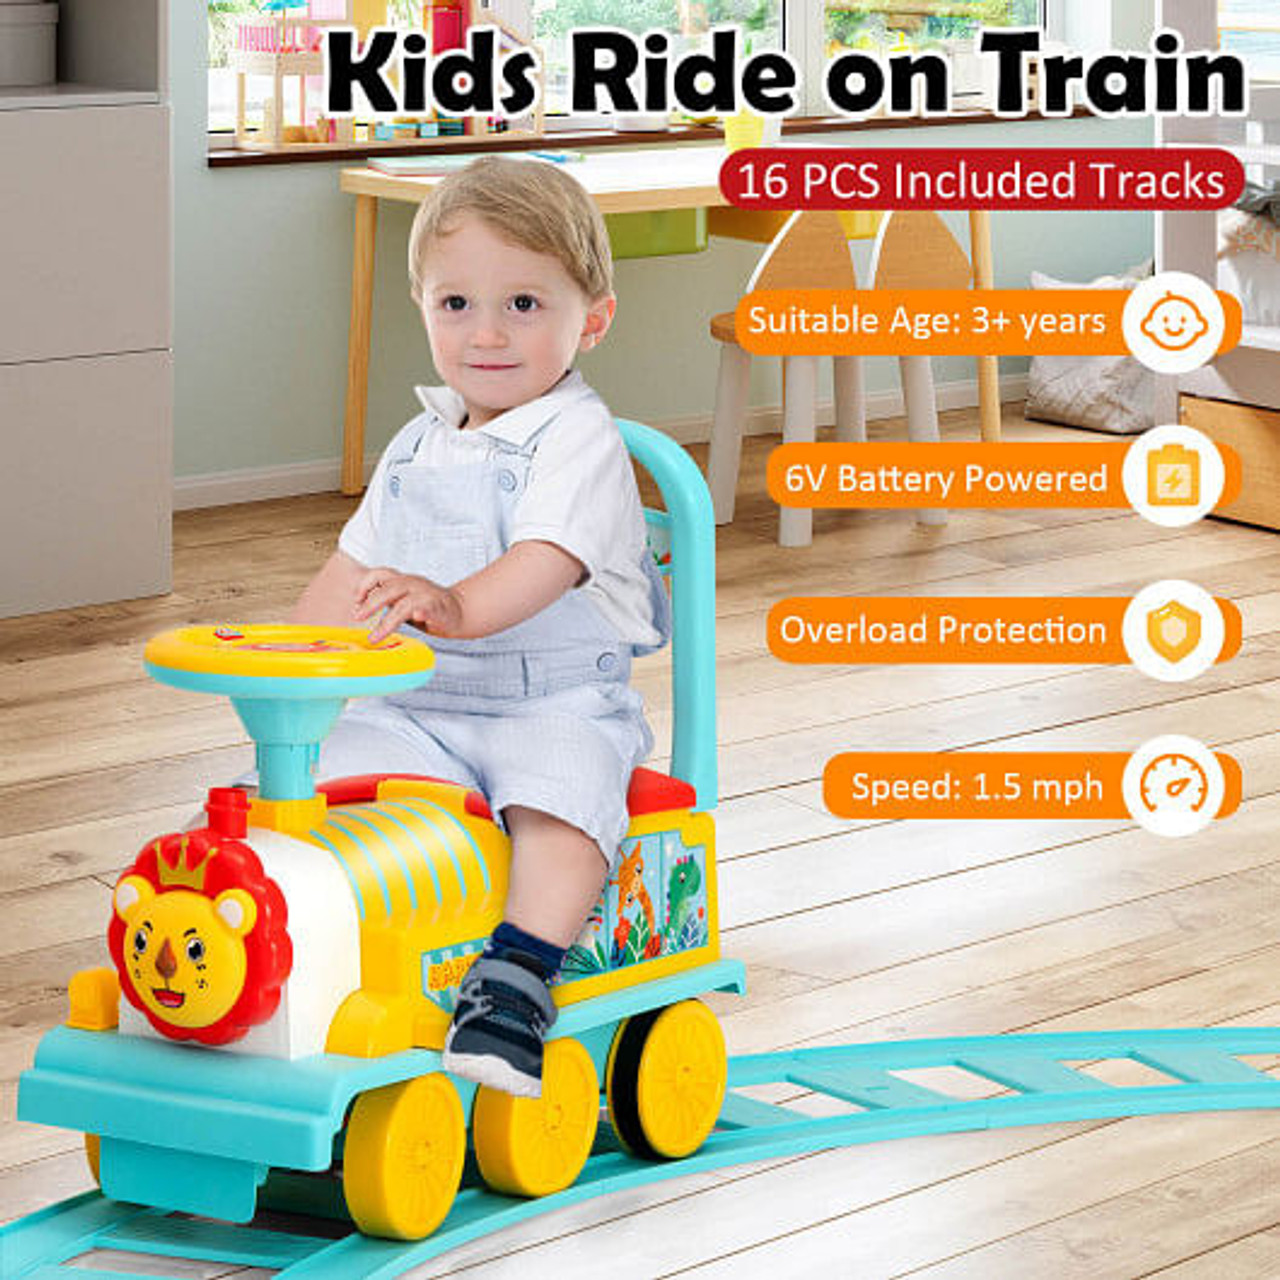 6V Electric Kids Ride On Car Toy Train with 16 Pieces Tracks-Blue